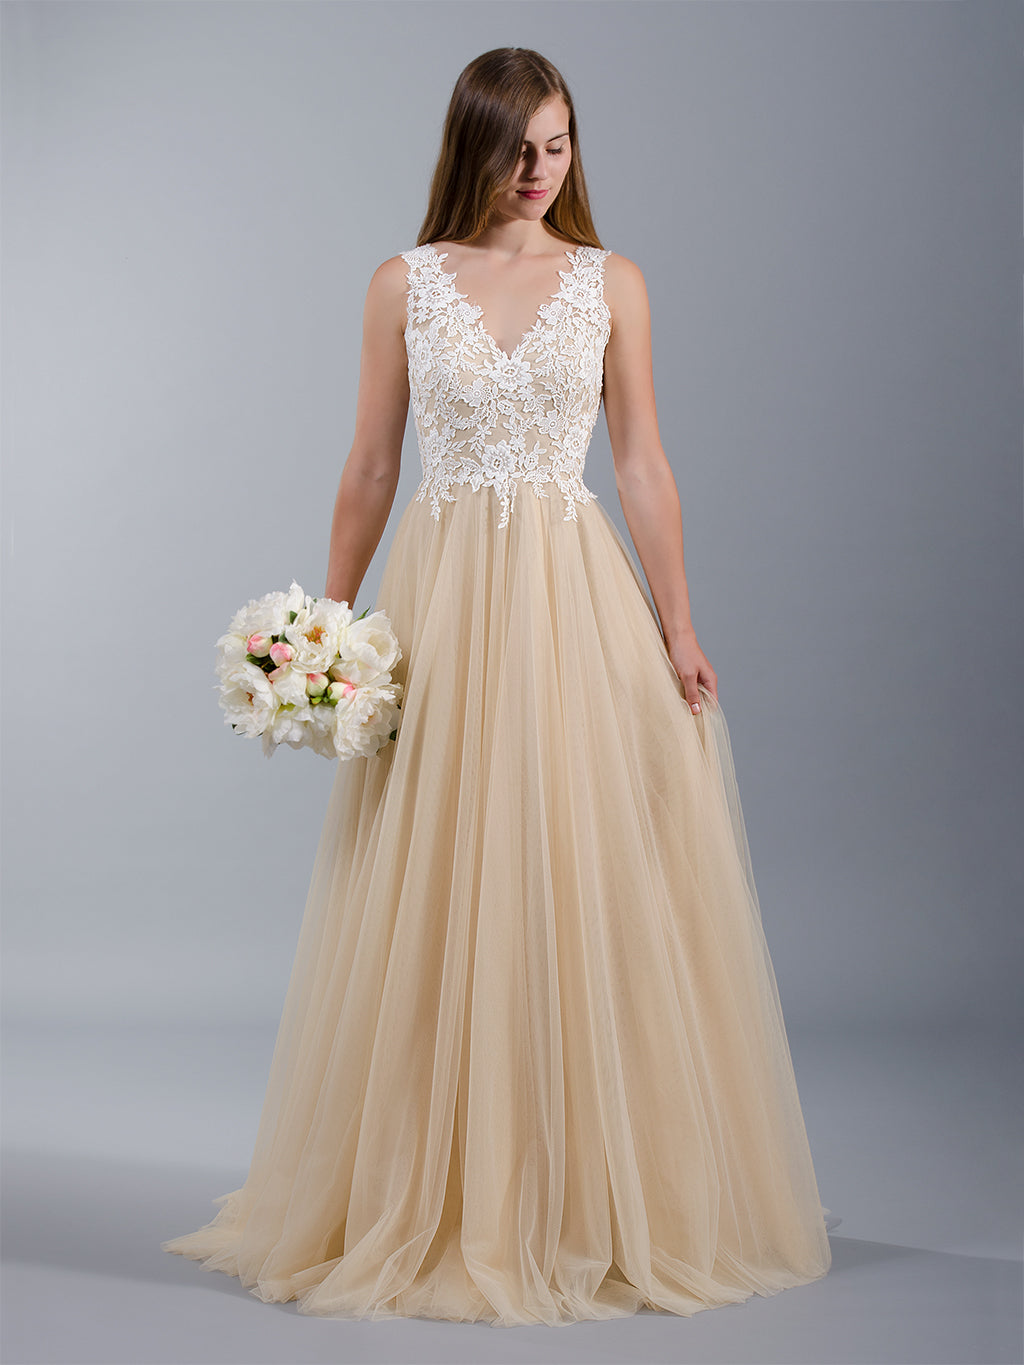 Sleeveless lace wedding dress with tulle skirts 4041